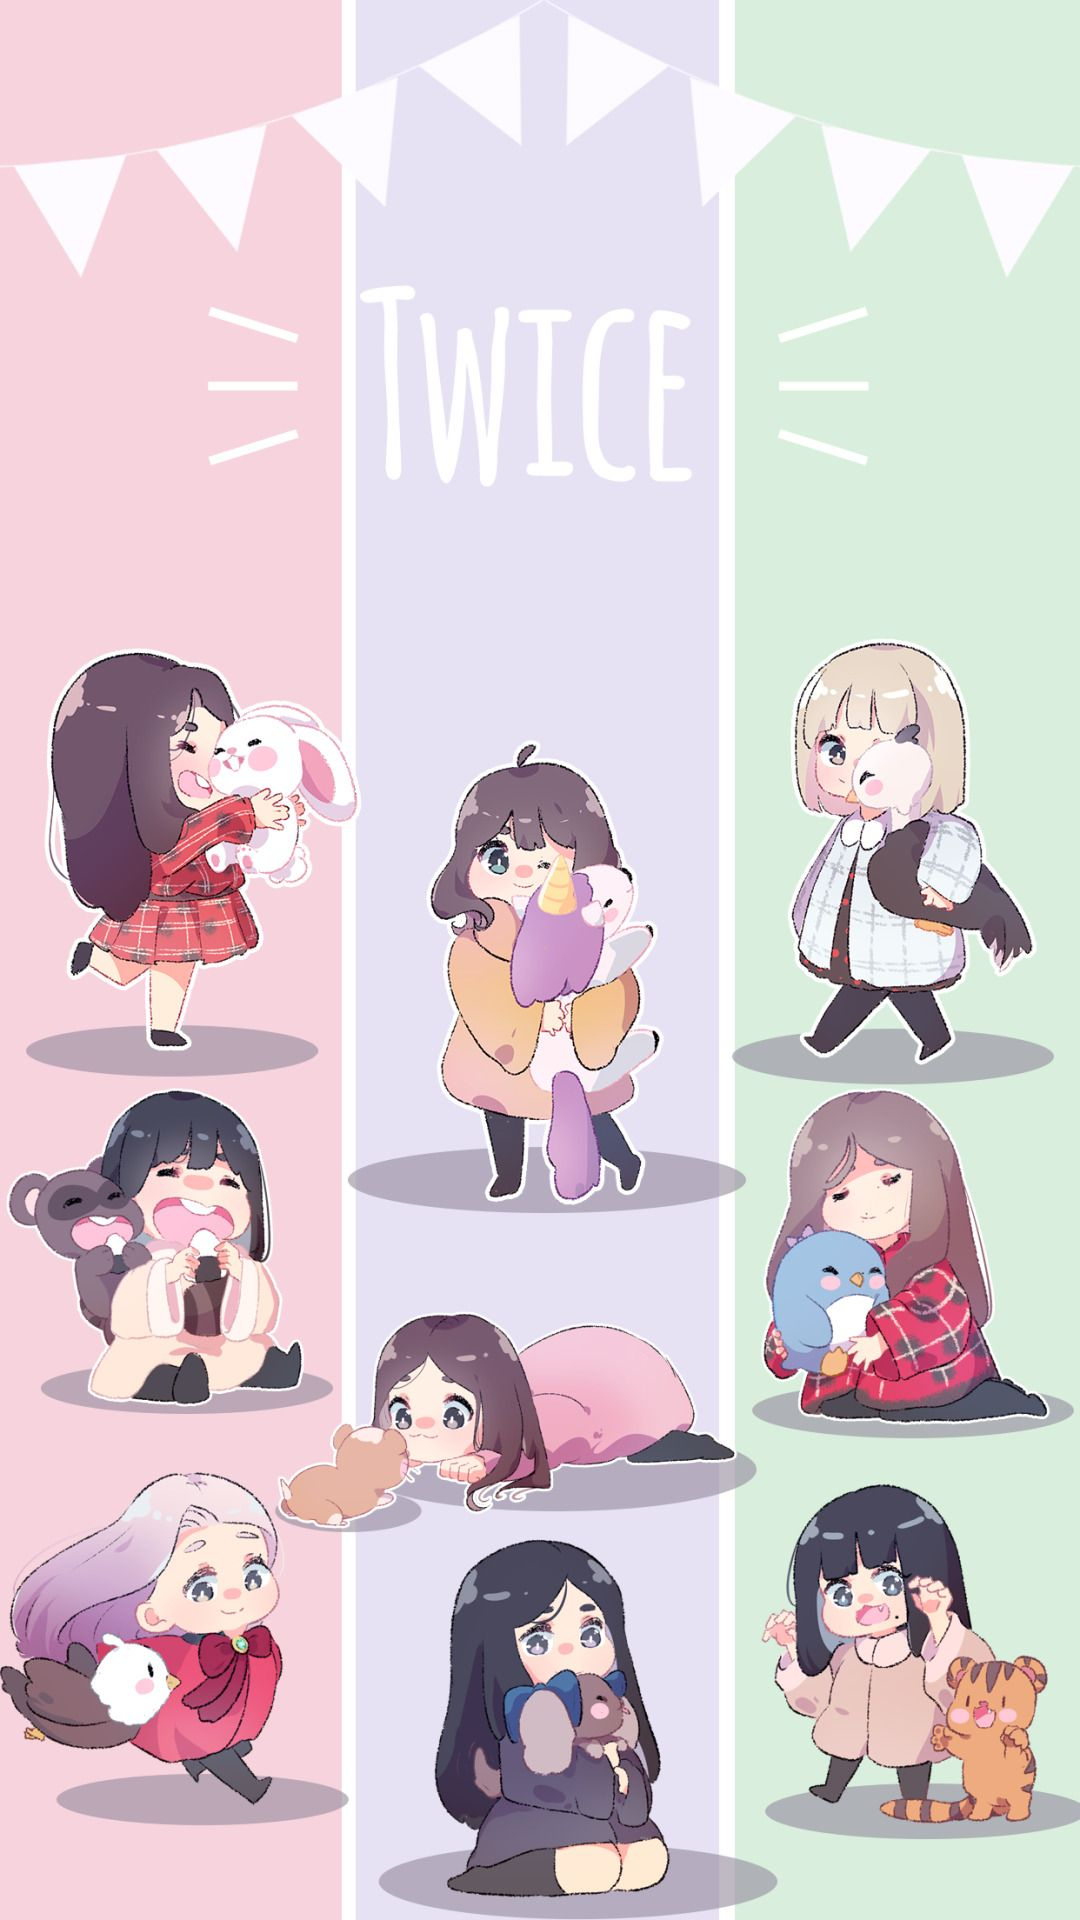 1080x1920 TWICE Anime Wallpapers Top Free TWICE Anime Backgrounds